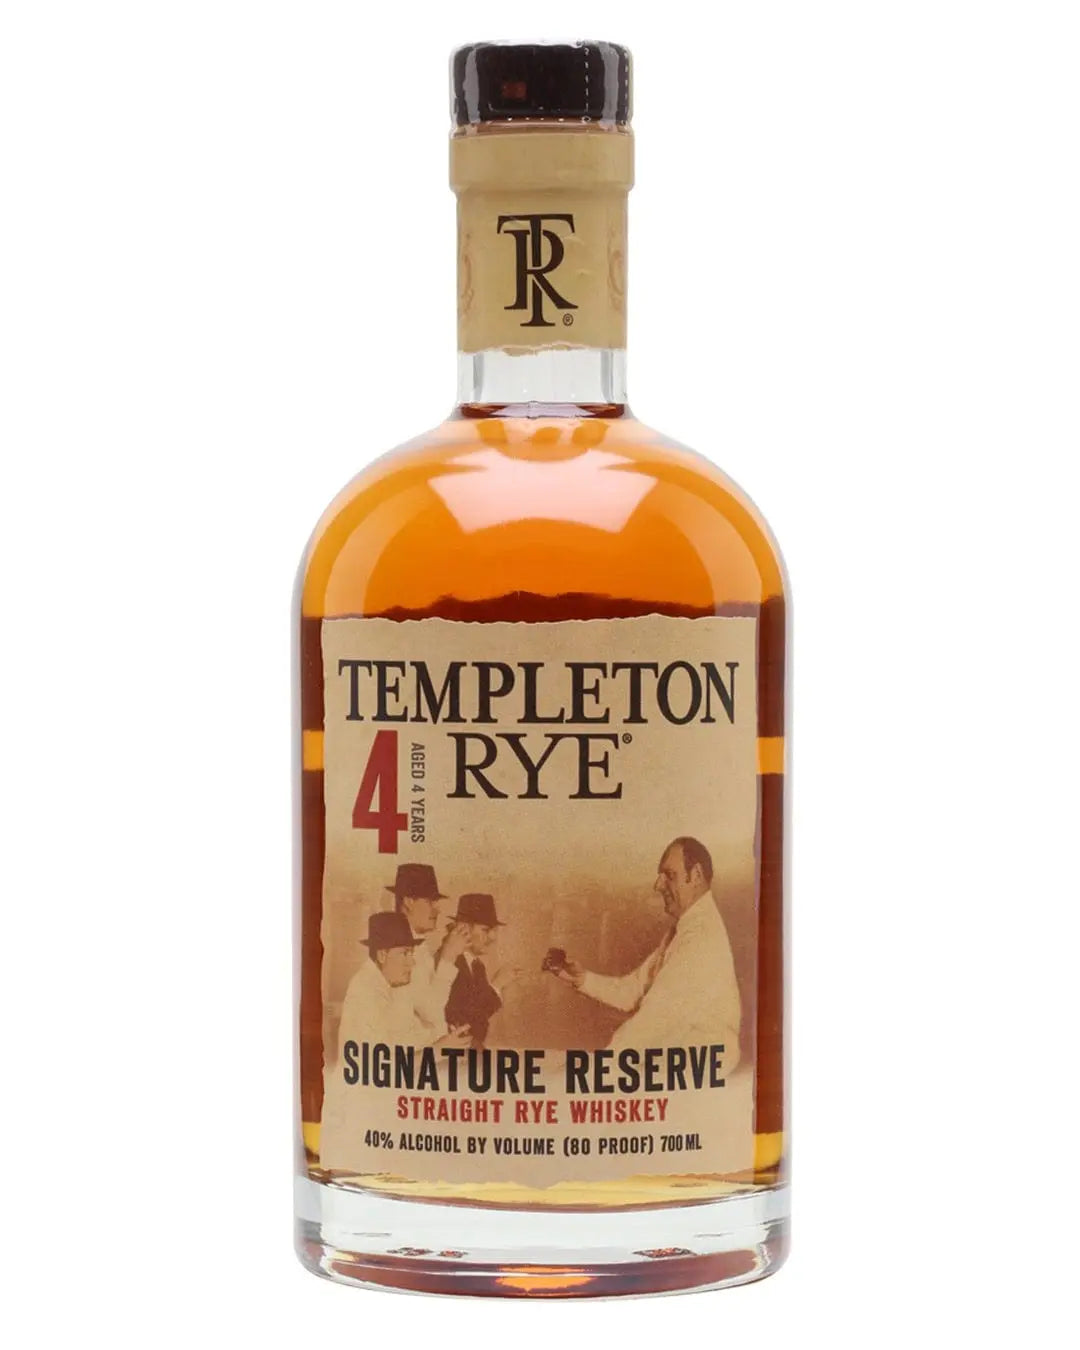 Templeton Rye 4 Year Old Signature Reserve Whiskey, 70 cl Whisky